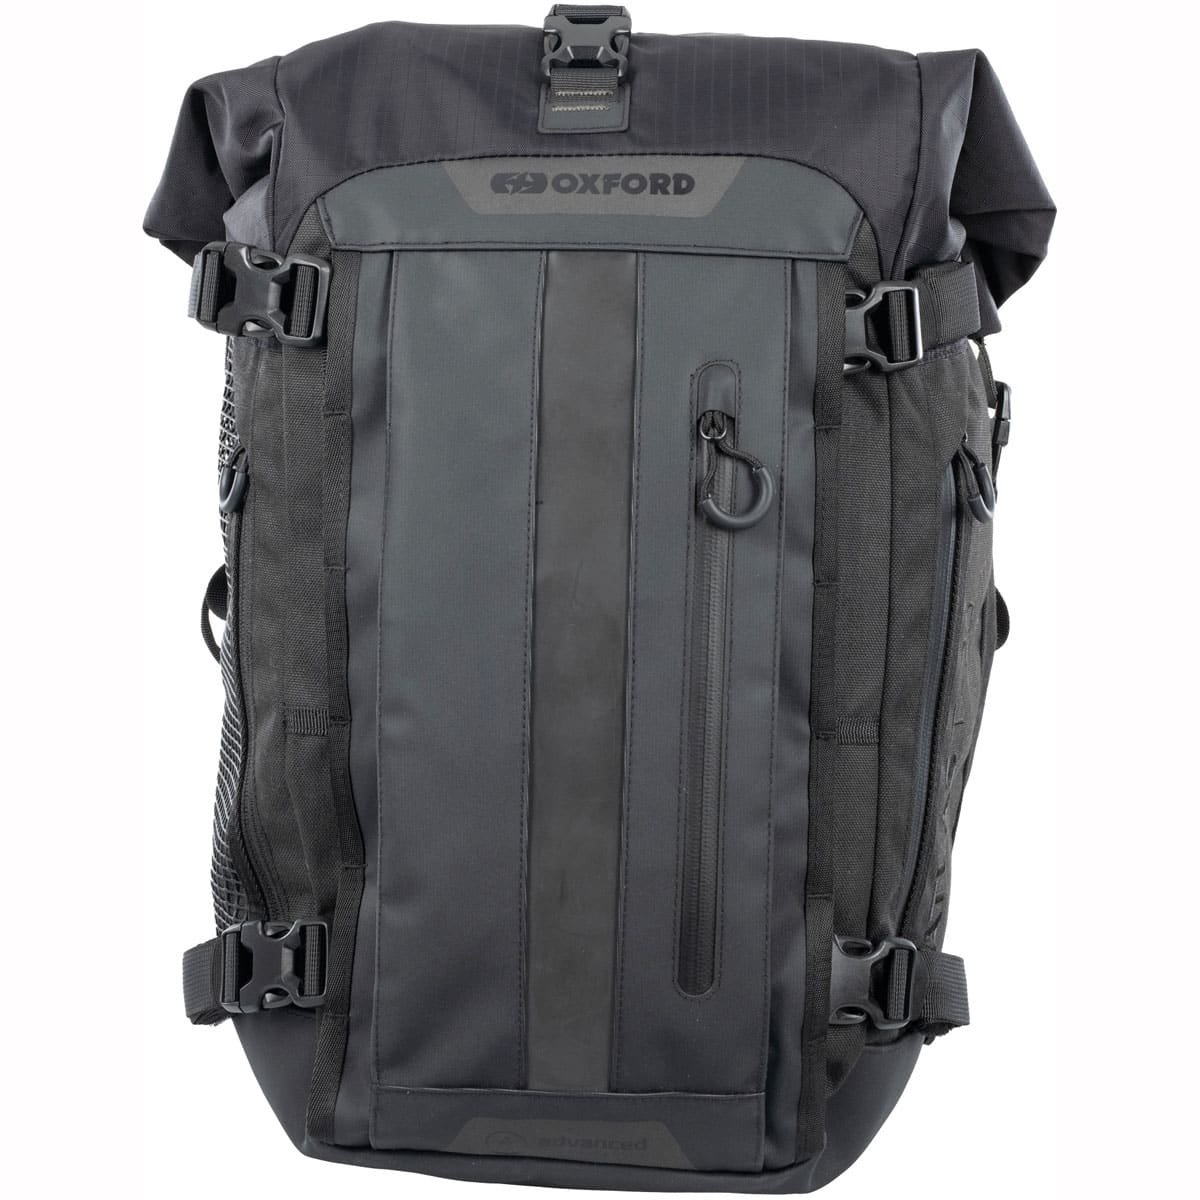 Get ready to explore without limits with the Oxford Atlas T-20 Advanced Tourpack. It's a tailpack designed for ultimate adaptability and durability.